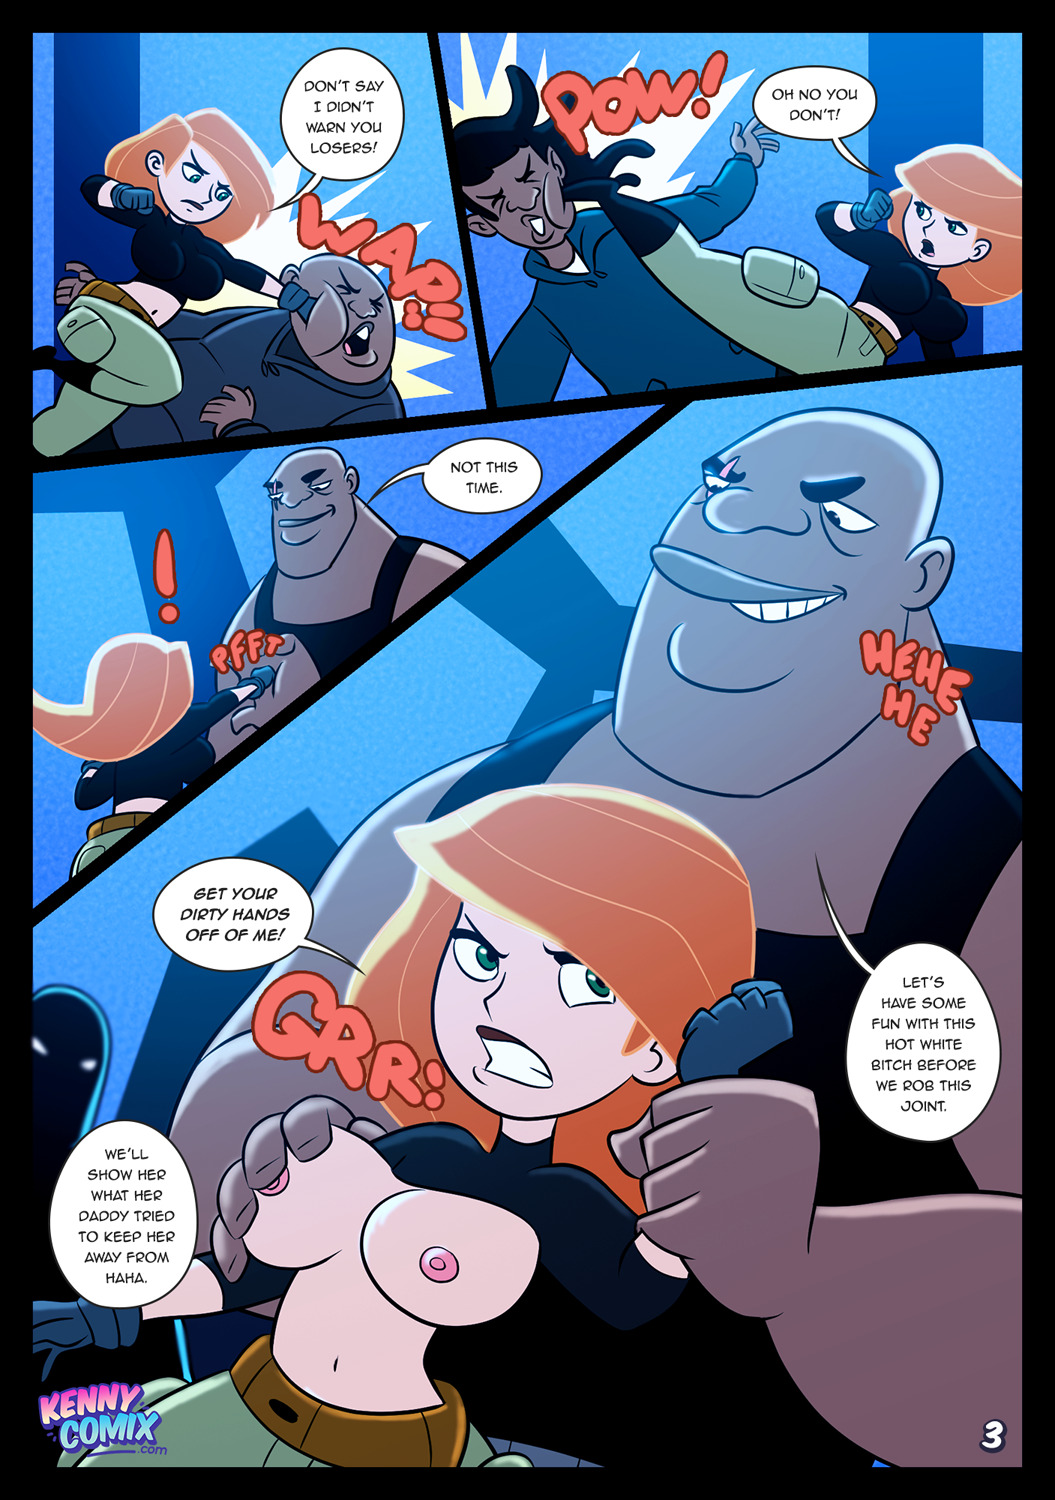 Kim Possible: The Plot Drakkens P.1 - Page 3Art: Risketcher / Story: KennycomixSupport